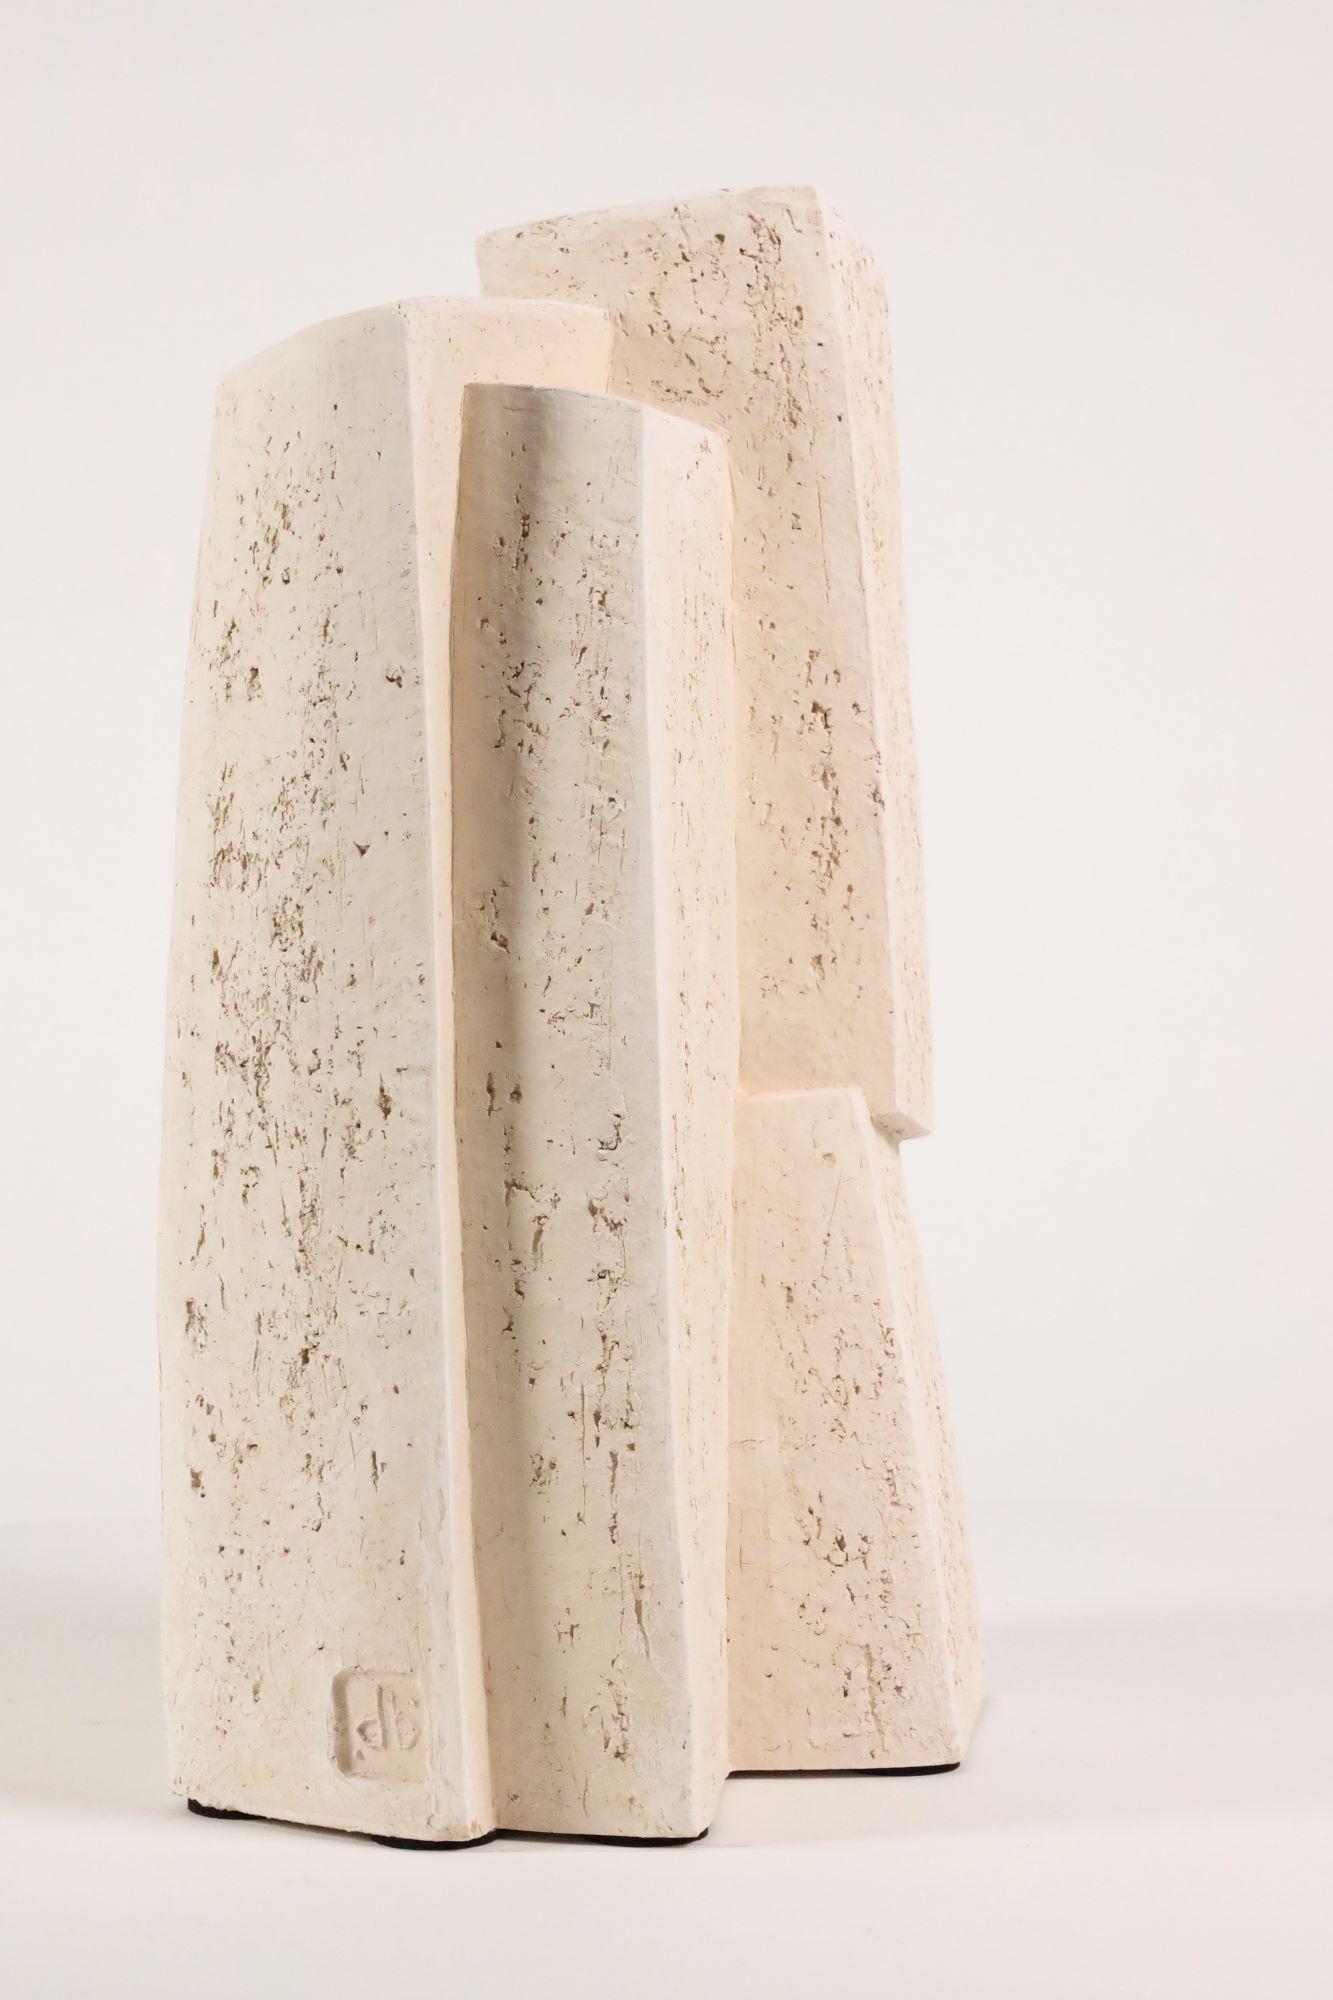 Union V by Delphine Brabant - Abstract geometric sculpture, terracotta, white For Sale 3